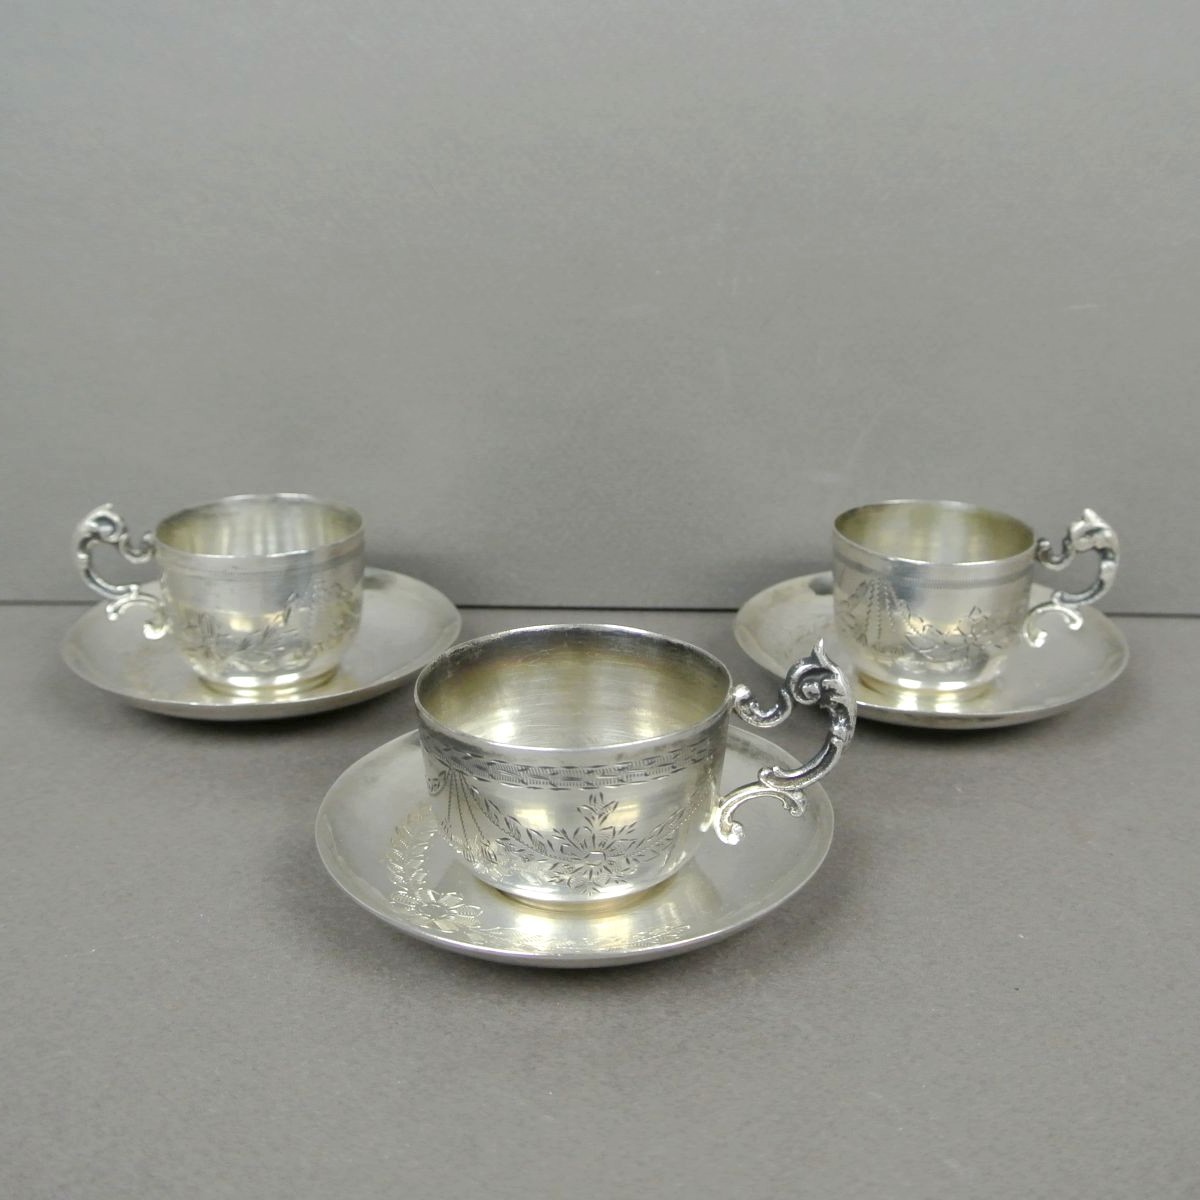 Lot of 3 Cups & Saucers Silver Heirloom JSC White Demitasse Espresso Coffee  Tea